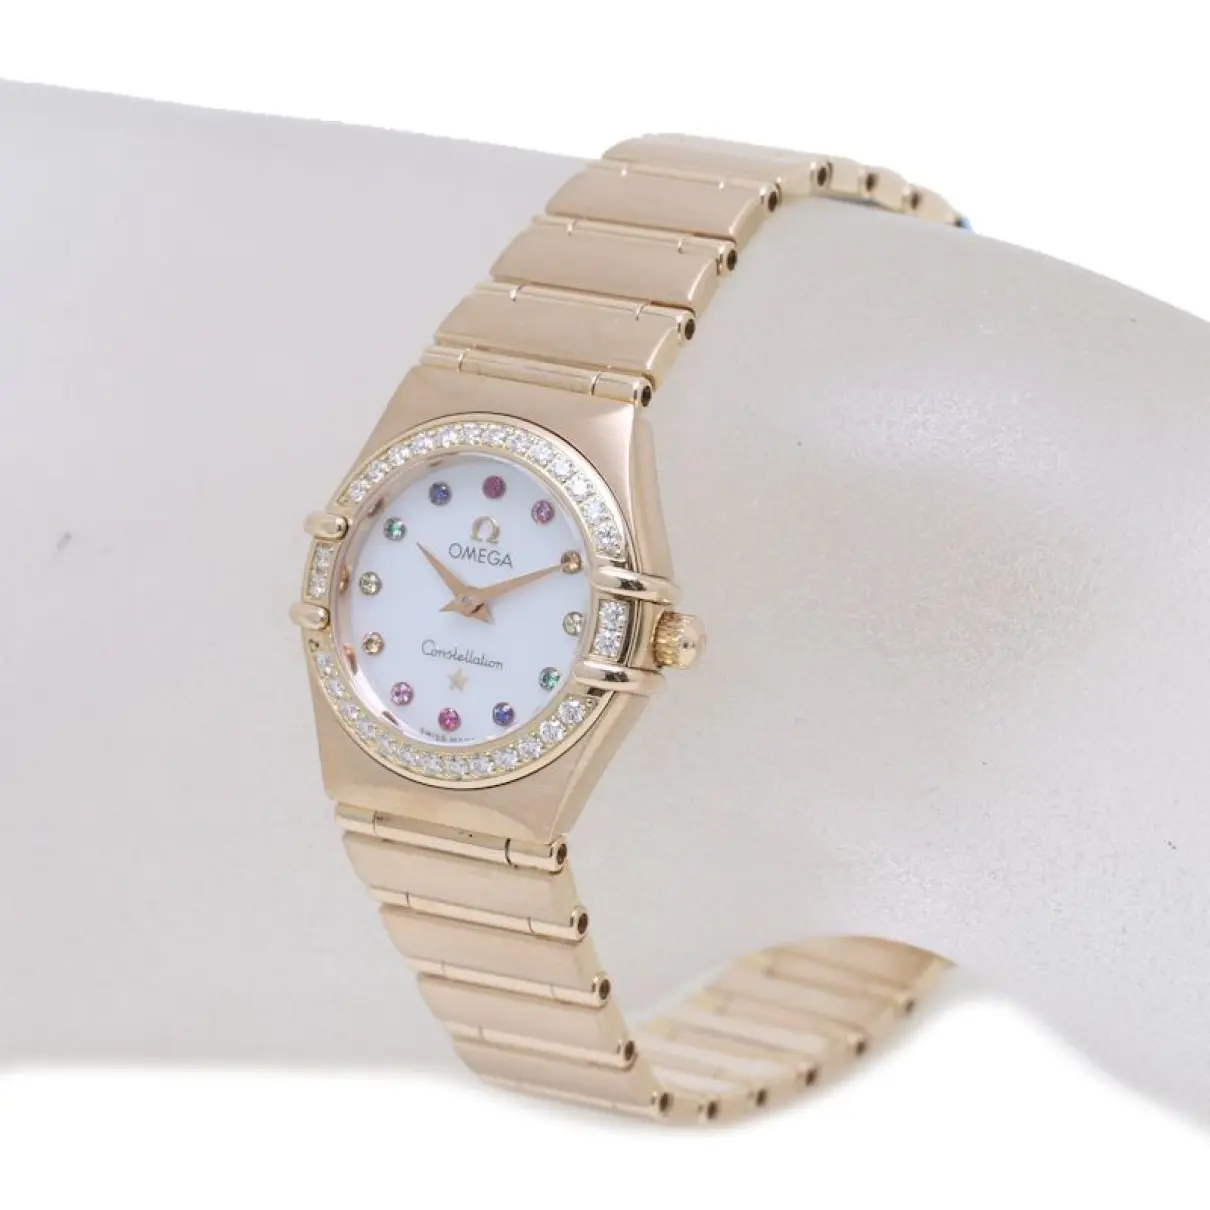 Buy Omega Constellation pink gold watch online